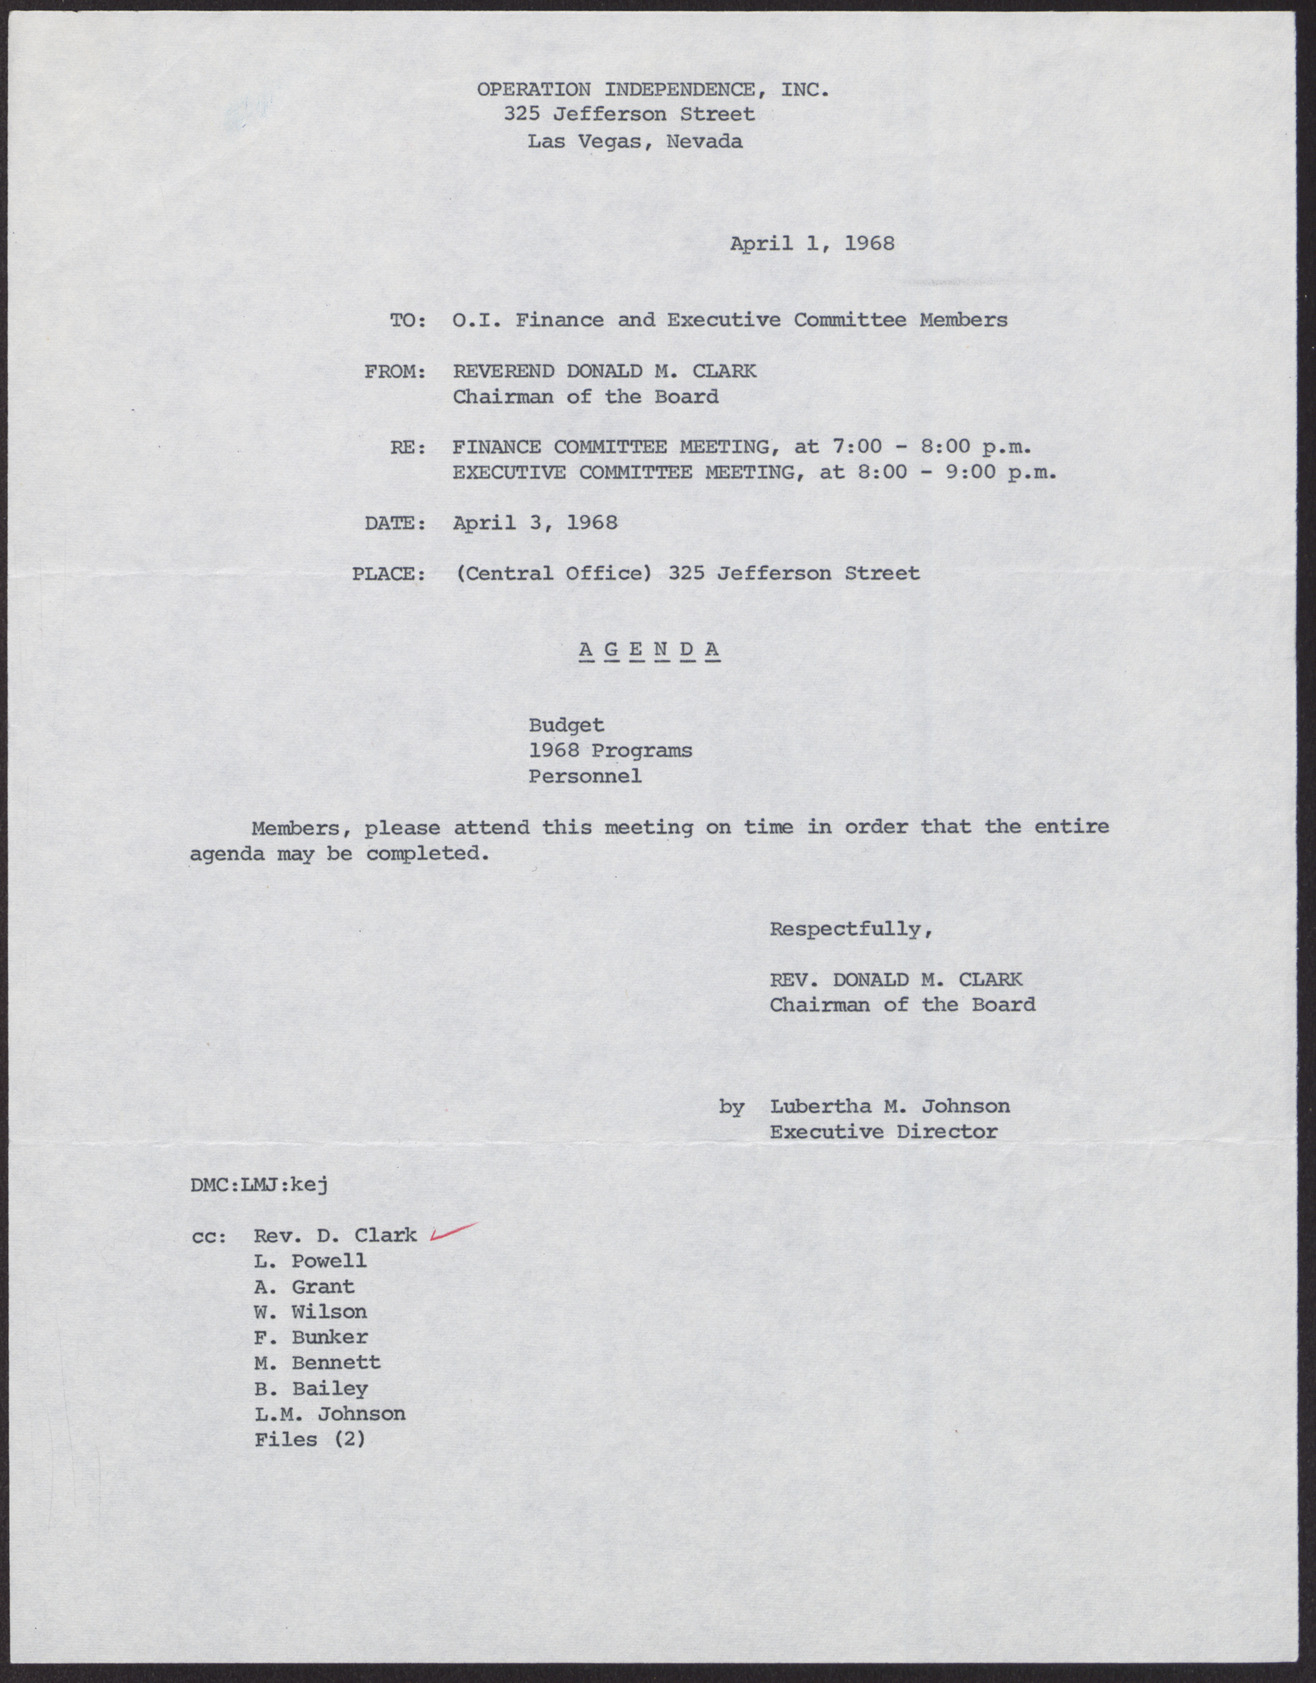 Memo and Agenda to Operation Independence Finance and Executive Committee Members from Reverend Donald M. Clark, April 1, 1968